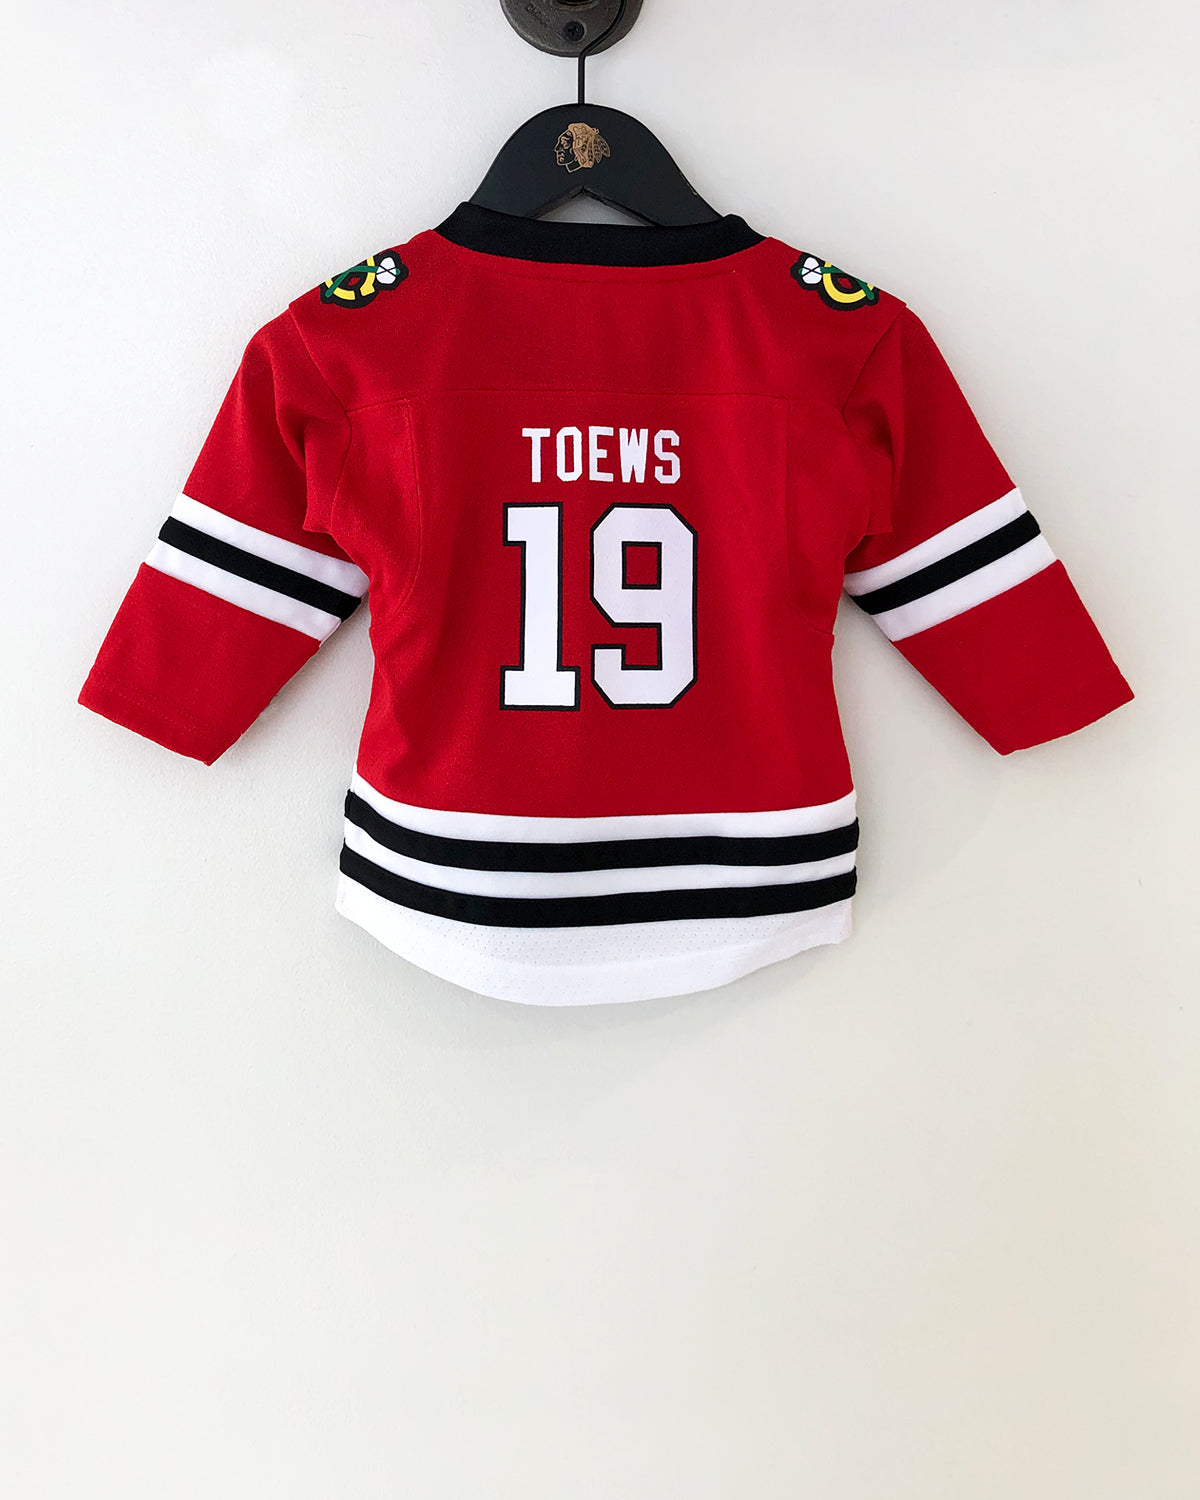 Vintage Youth NHL Chicago Blackhawks Jersey 'Toews 19'- Red - L